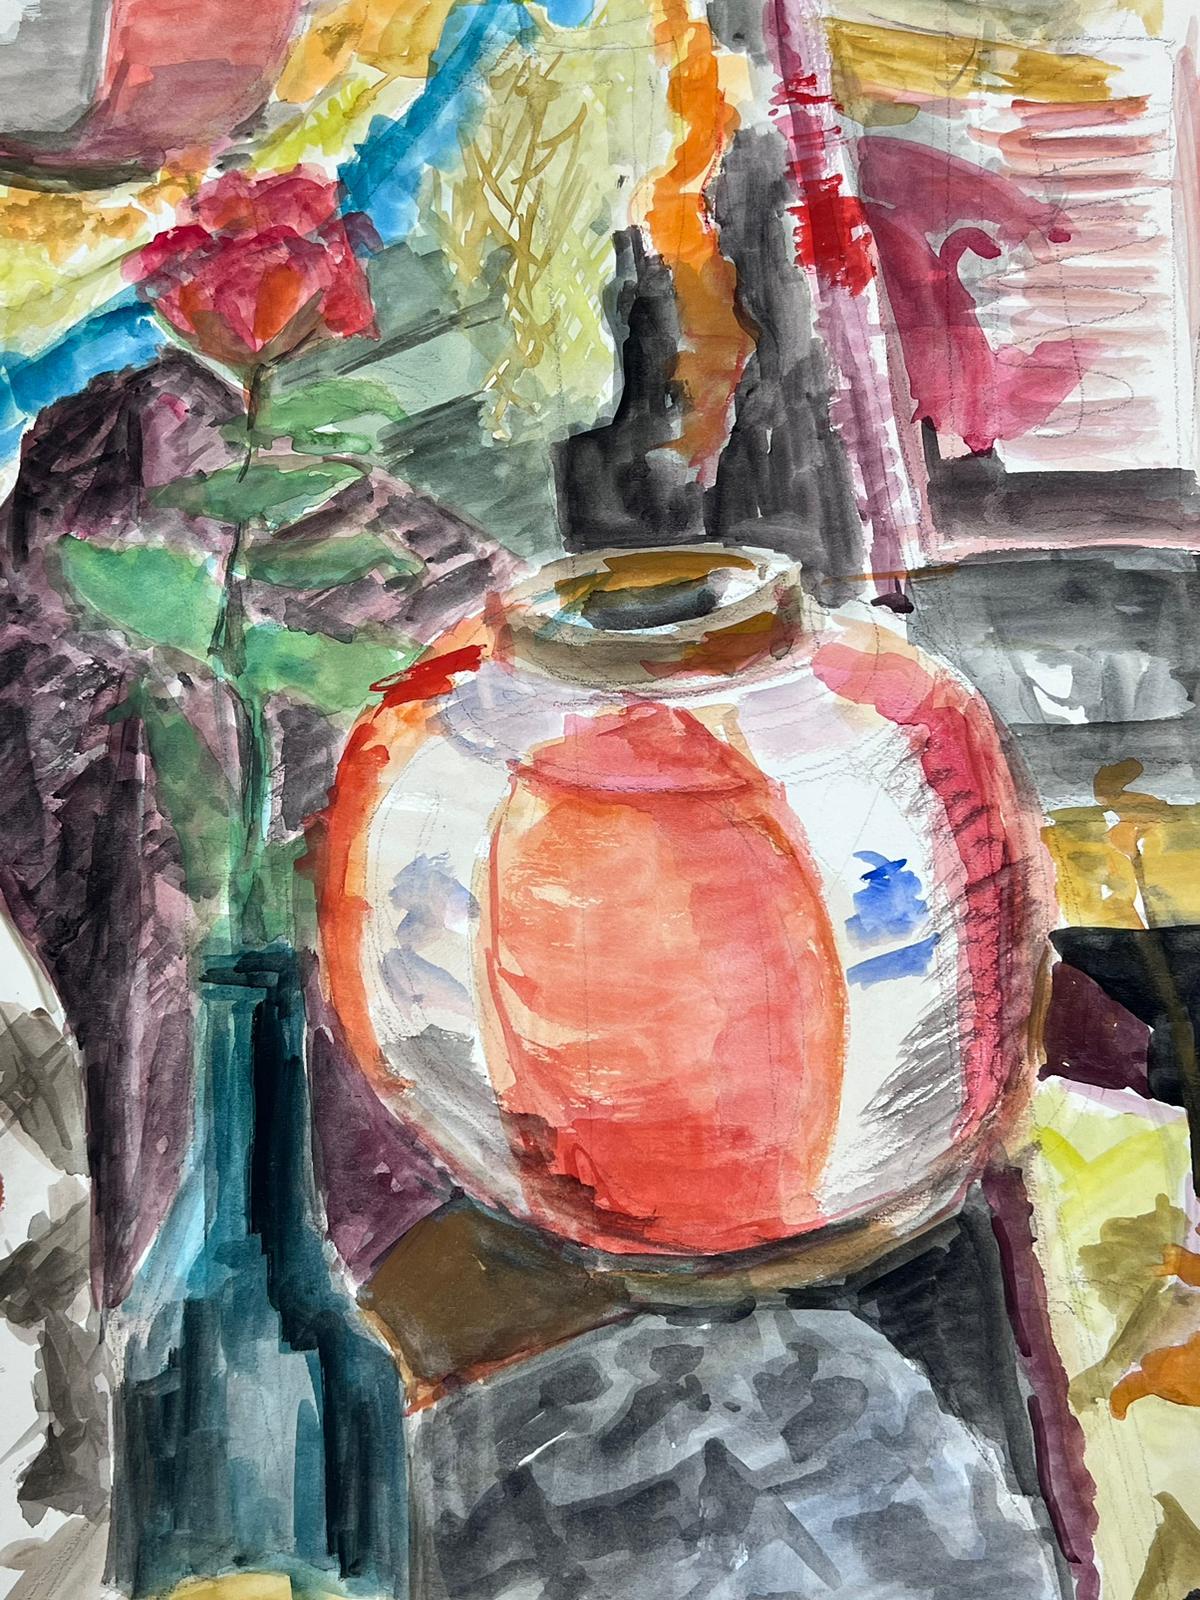 Still Life Composition
by Guy Nicod
(French 1923 - 2021)
watercolour on artist paper, unframed
painting : 26 x 19.5 inches
provenance: artists estate, France
condition: very good and sound condition